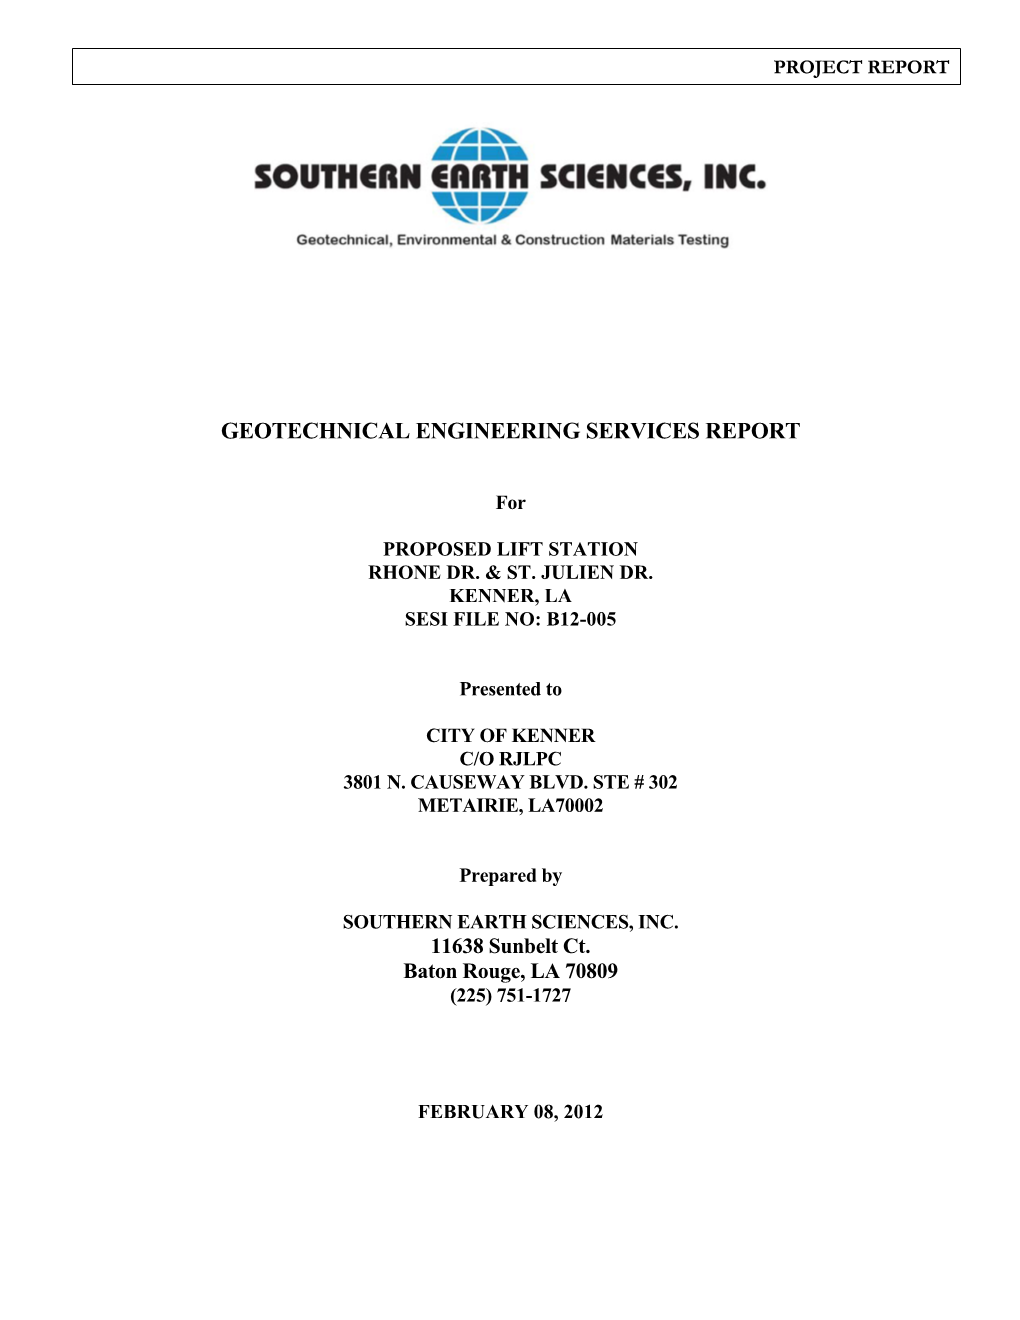 Geotechnical Engineering Services Report